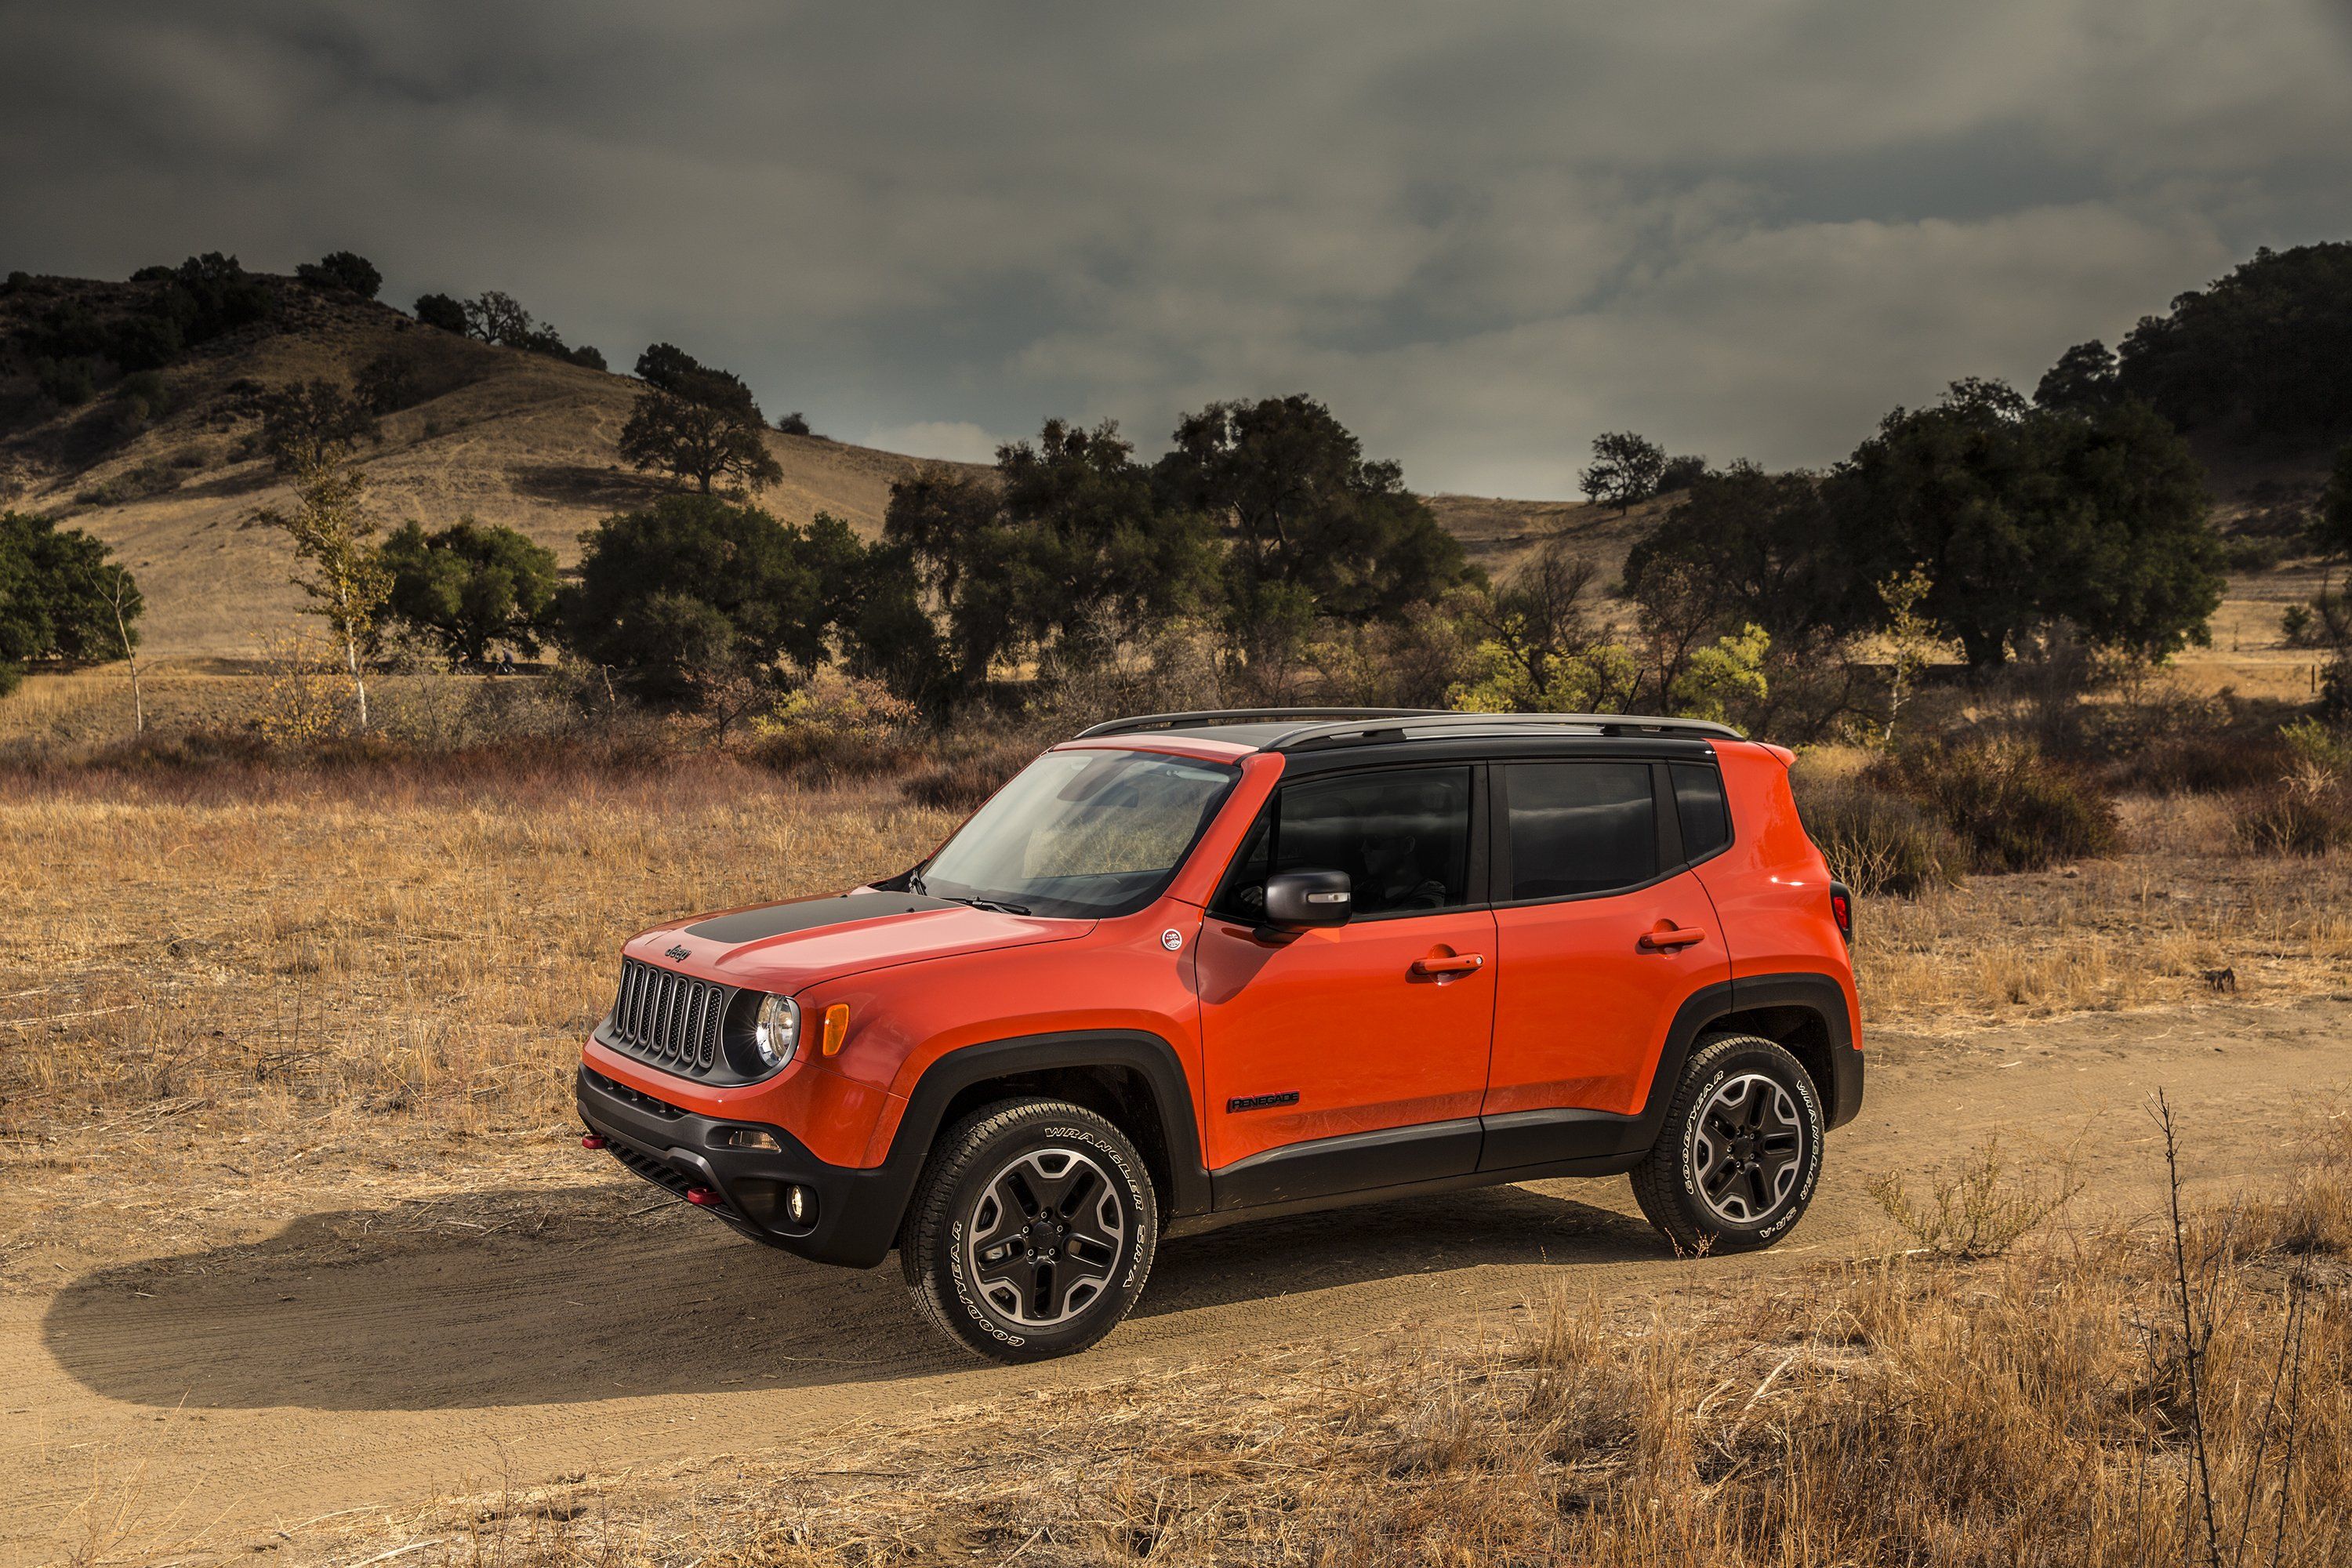 Nice FHDQ Wallpaper's Collection: Jeep Renegade Wallpaper (31)